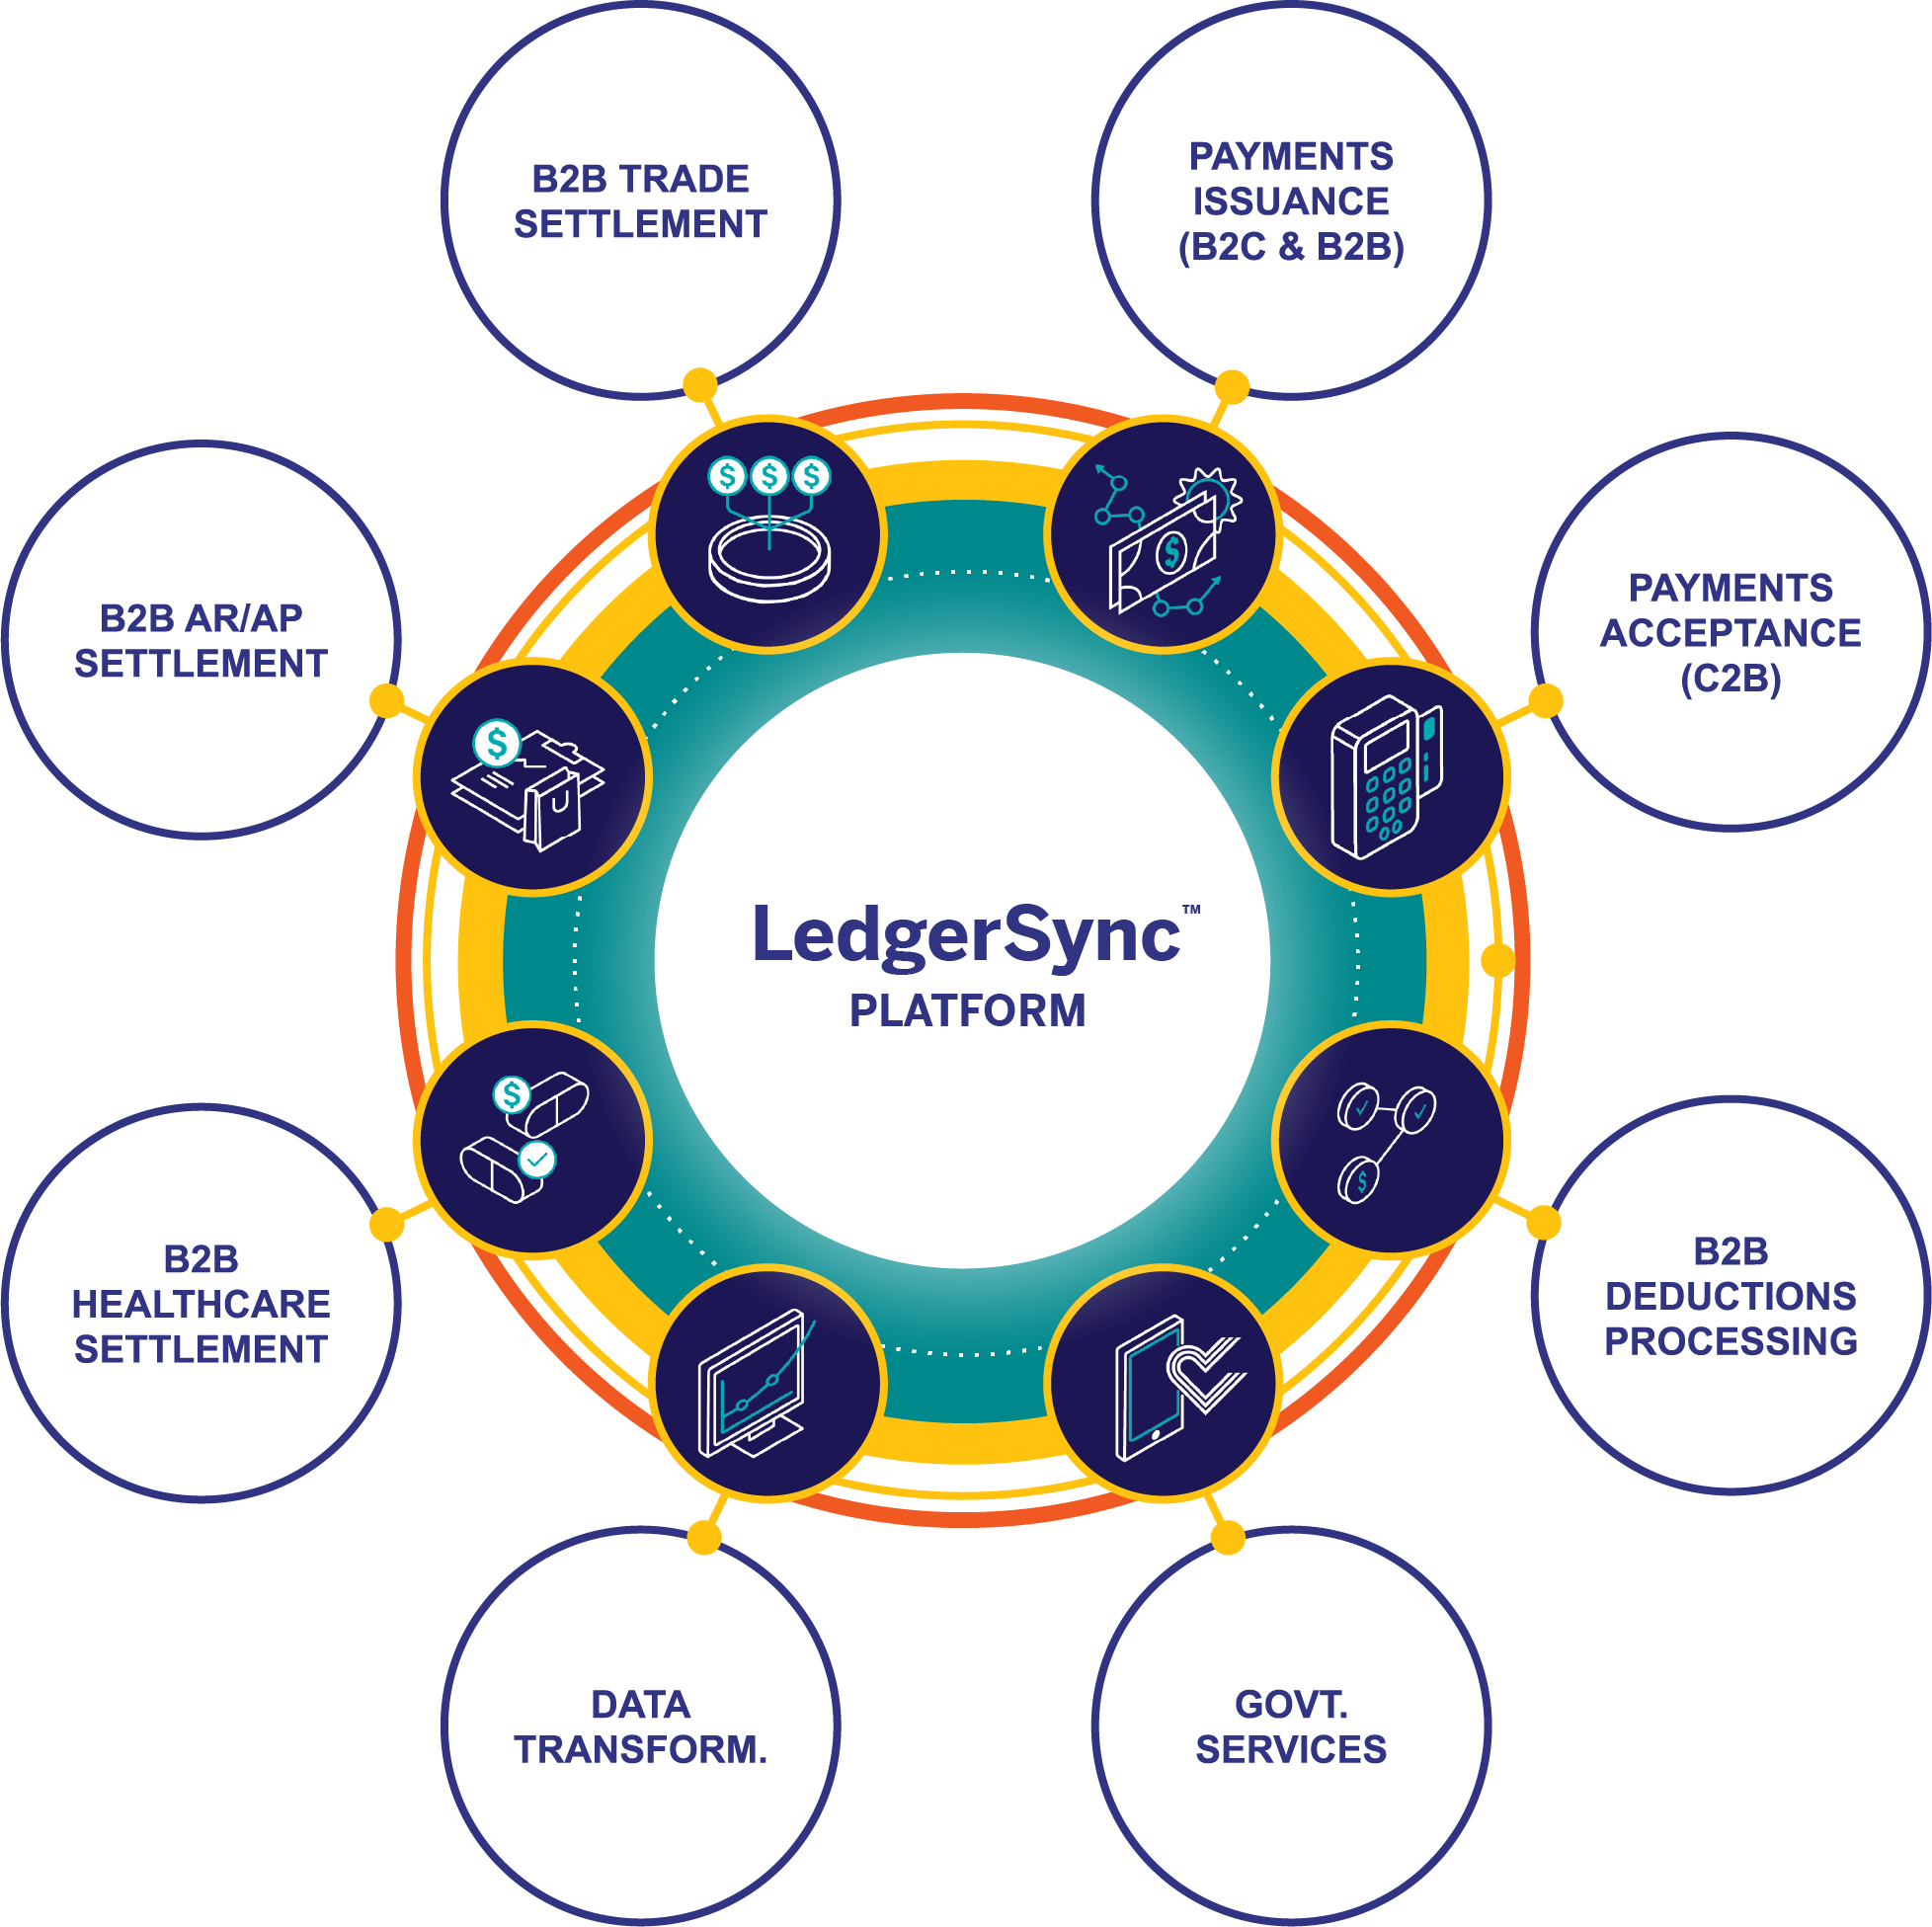 The LedgerSync platform includes B2B Trade Settlement, B2B AP/AP Settlement, B2B Healthcare Settlement, Data Transformation, Government Services, B2B Deductions Processing, Payments Acceptance(C2B), and Payments Issuance(B2C and B2B)